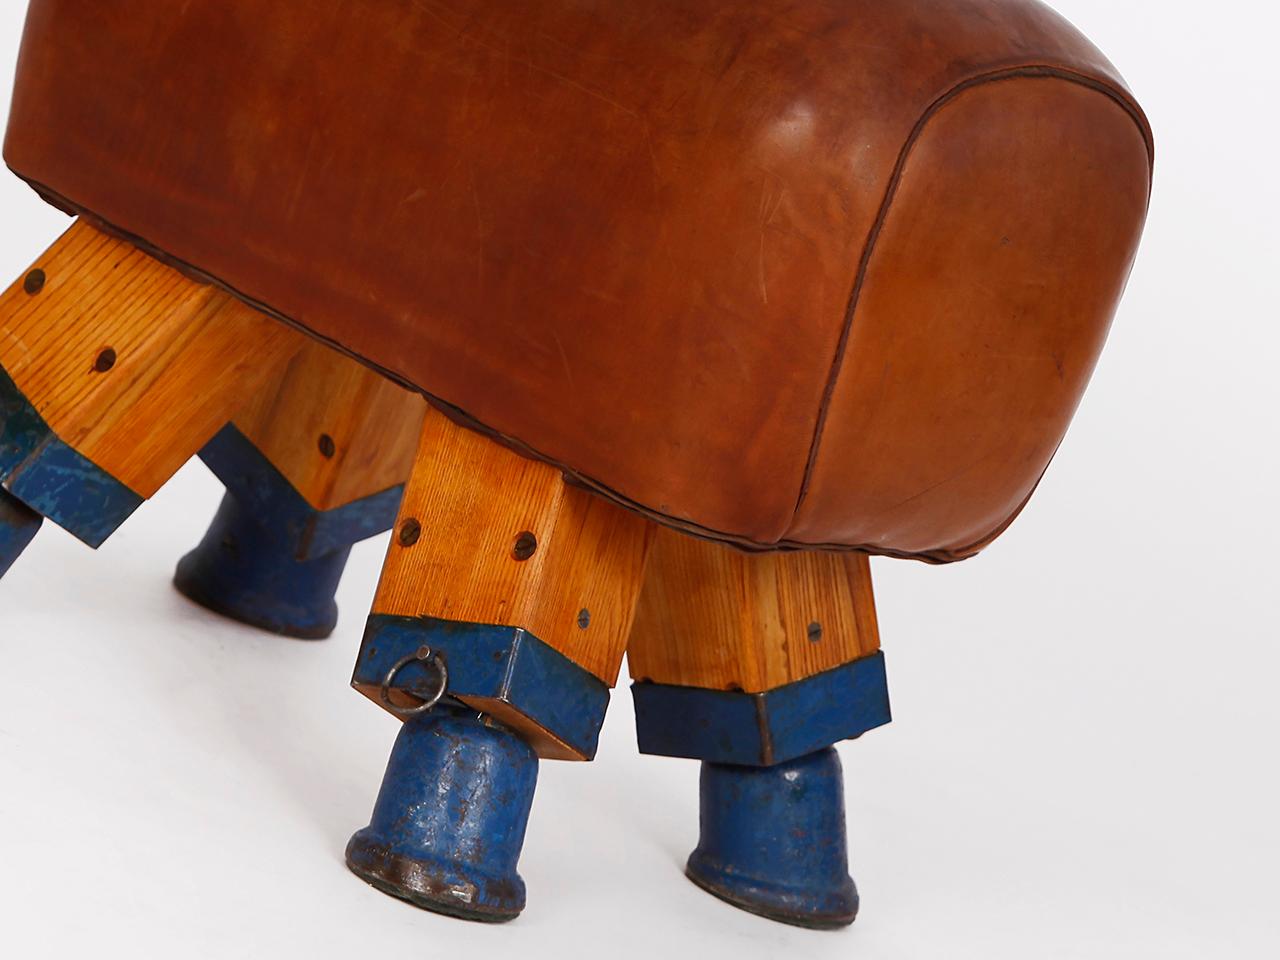 Industrial Vintage Czech Leather Turnbock Gym Stool Bench, 1930s